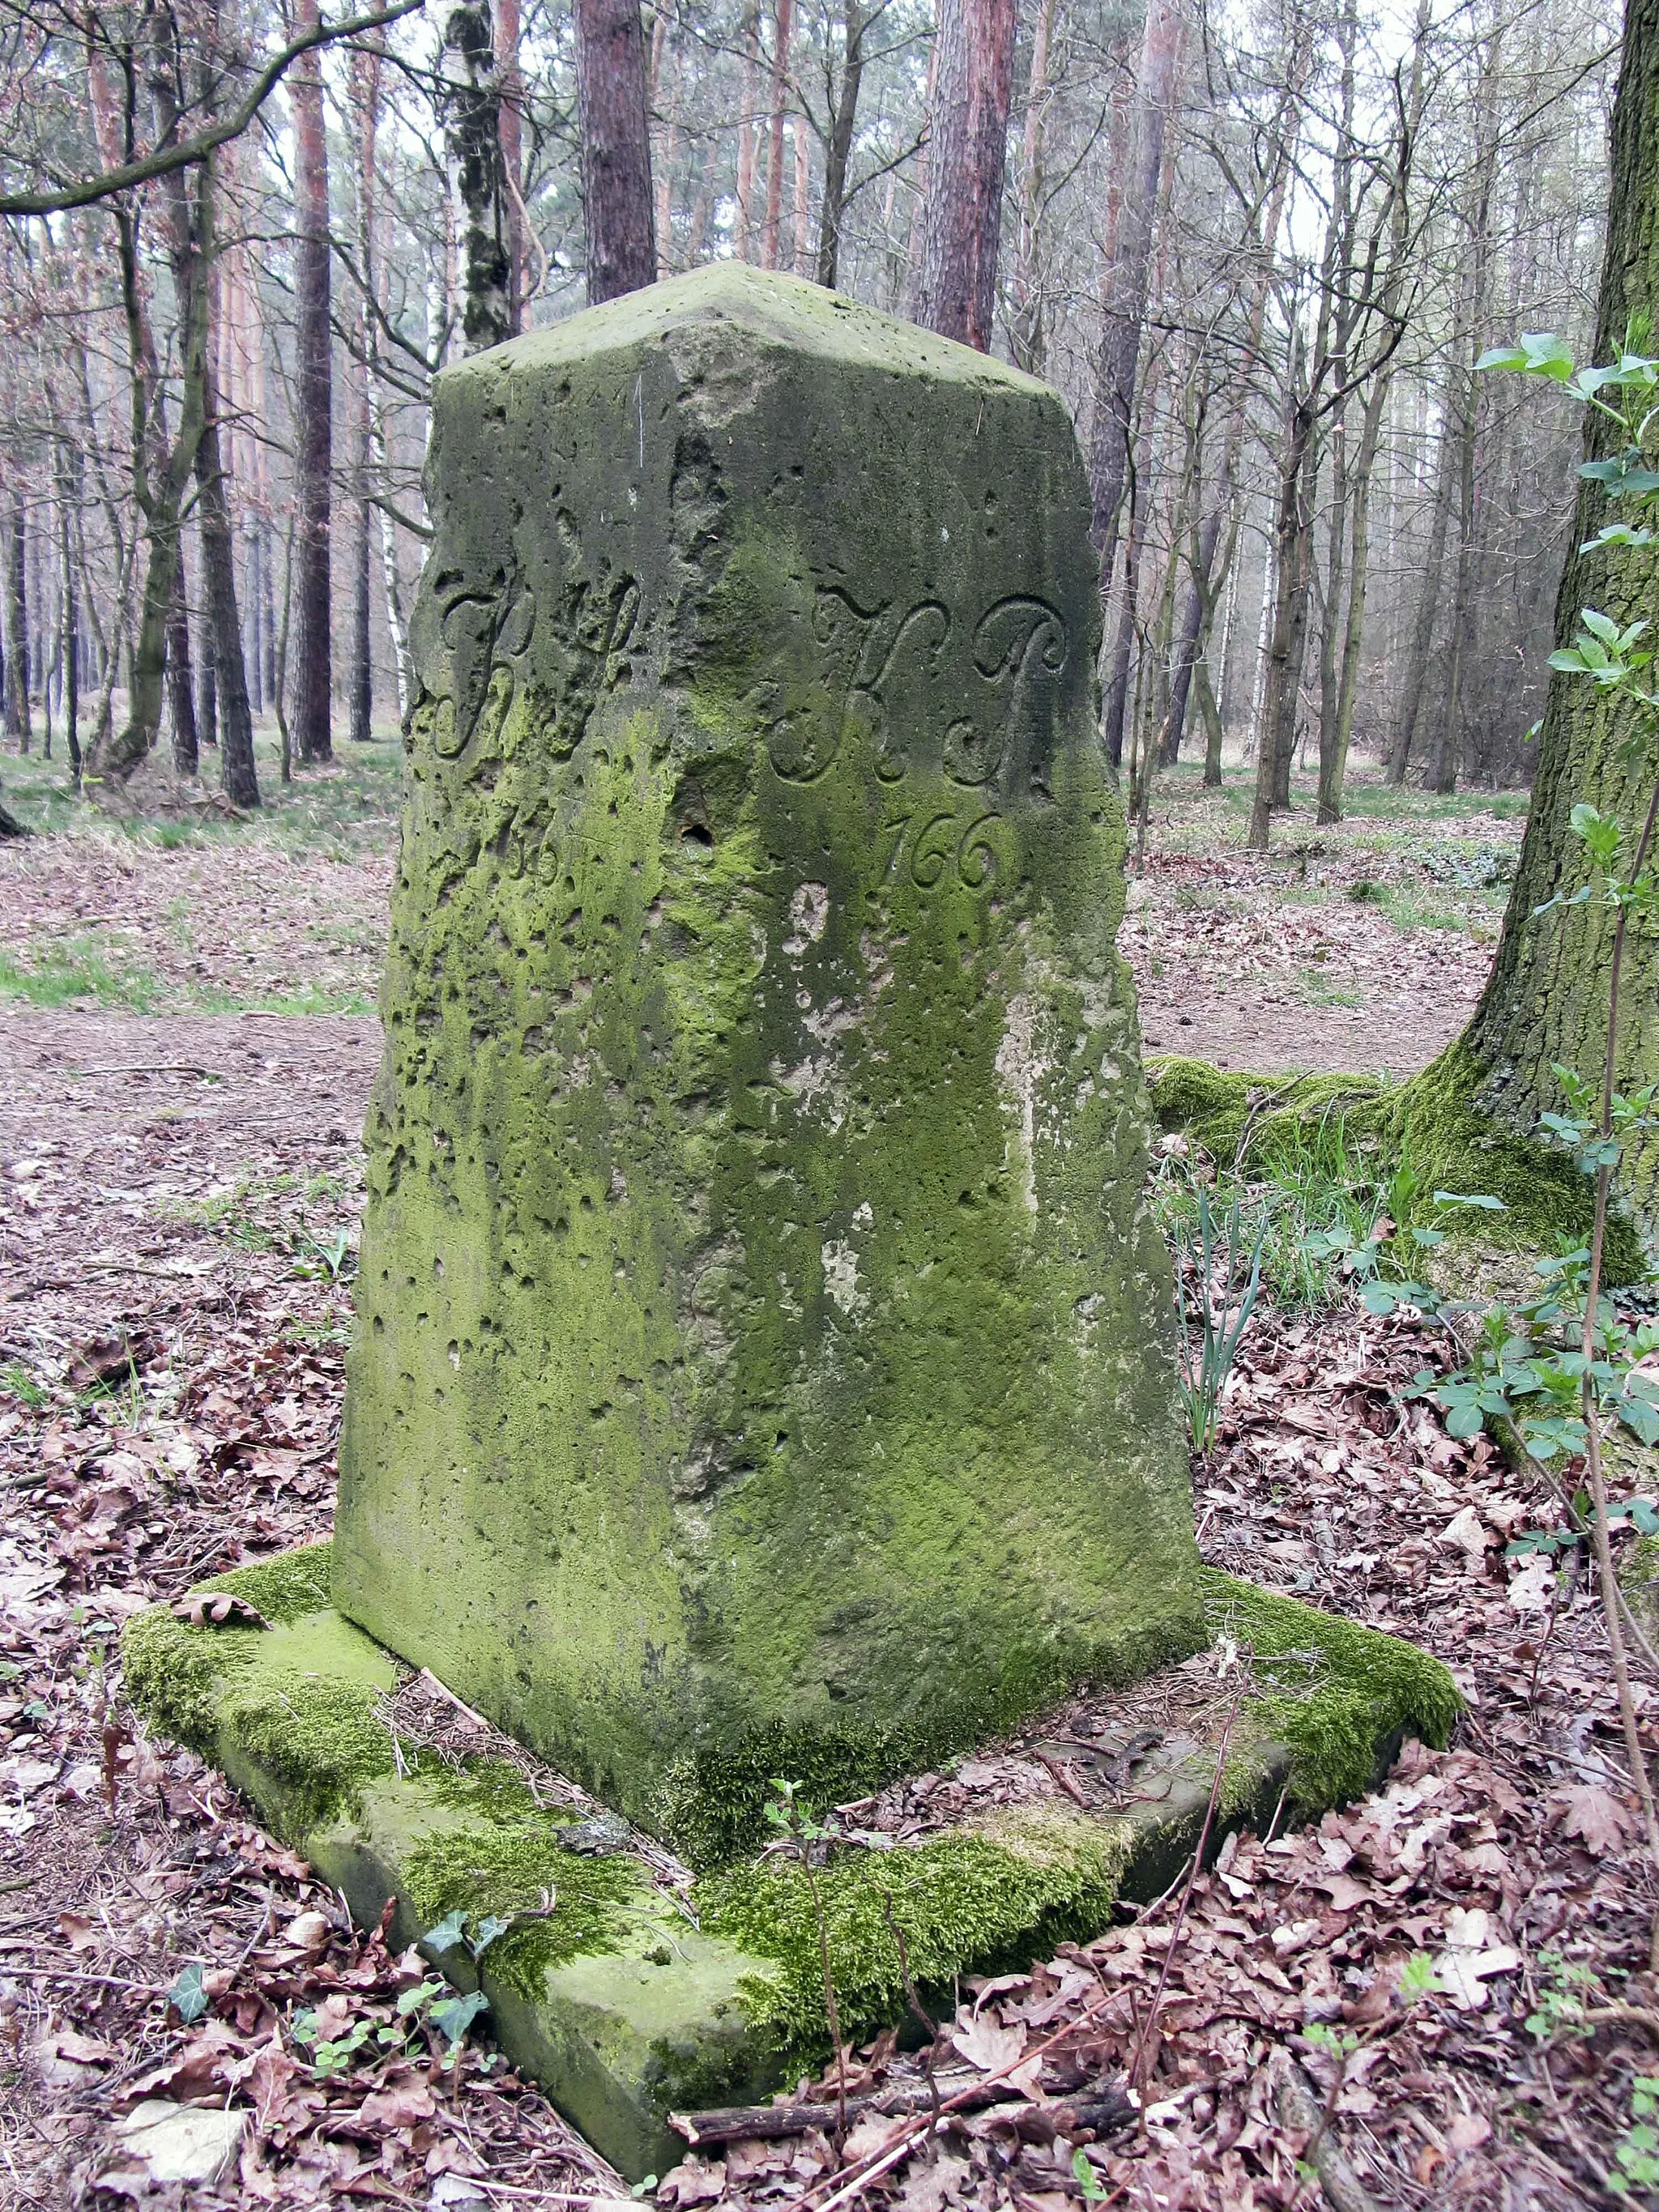 Photo showing: This media shows the protected monument of Saxony with the ID 08958679 KDSa/08958679(other).